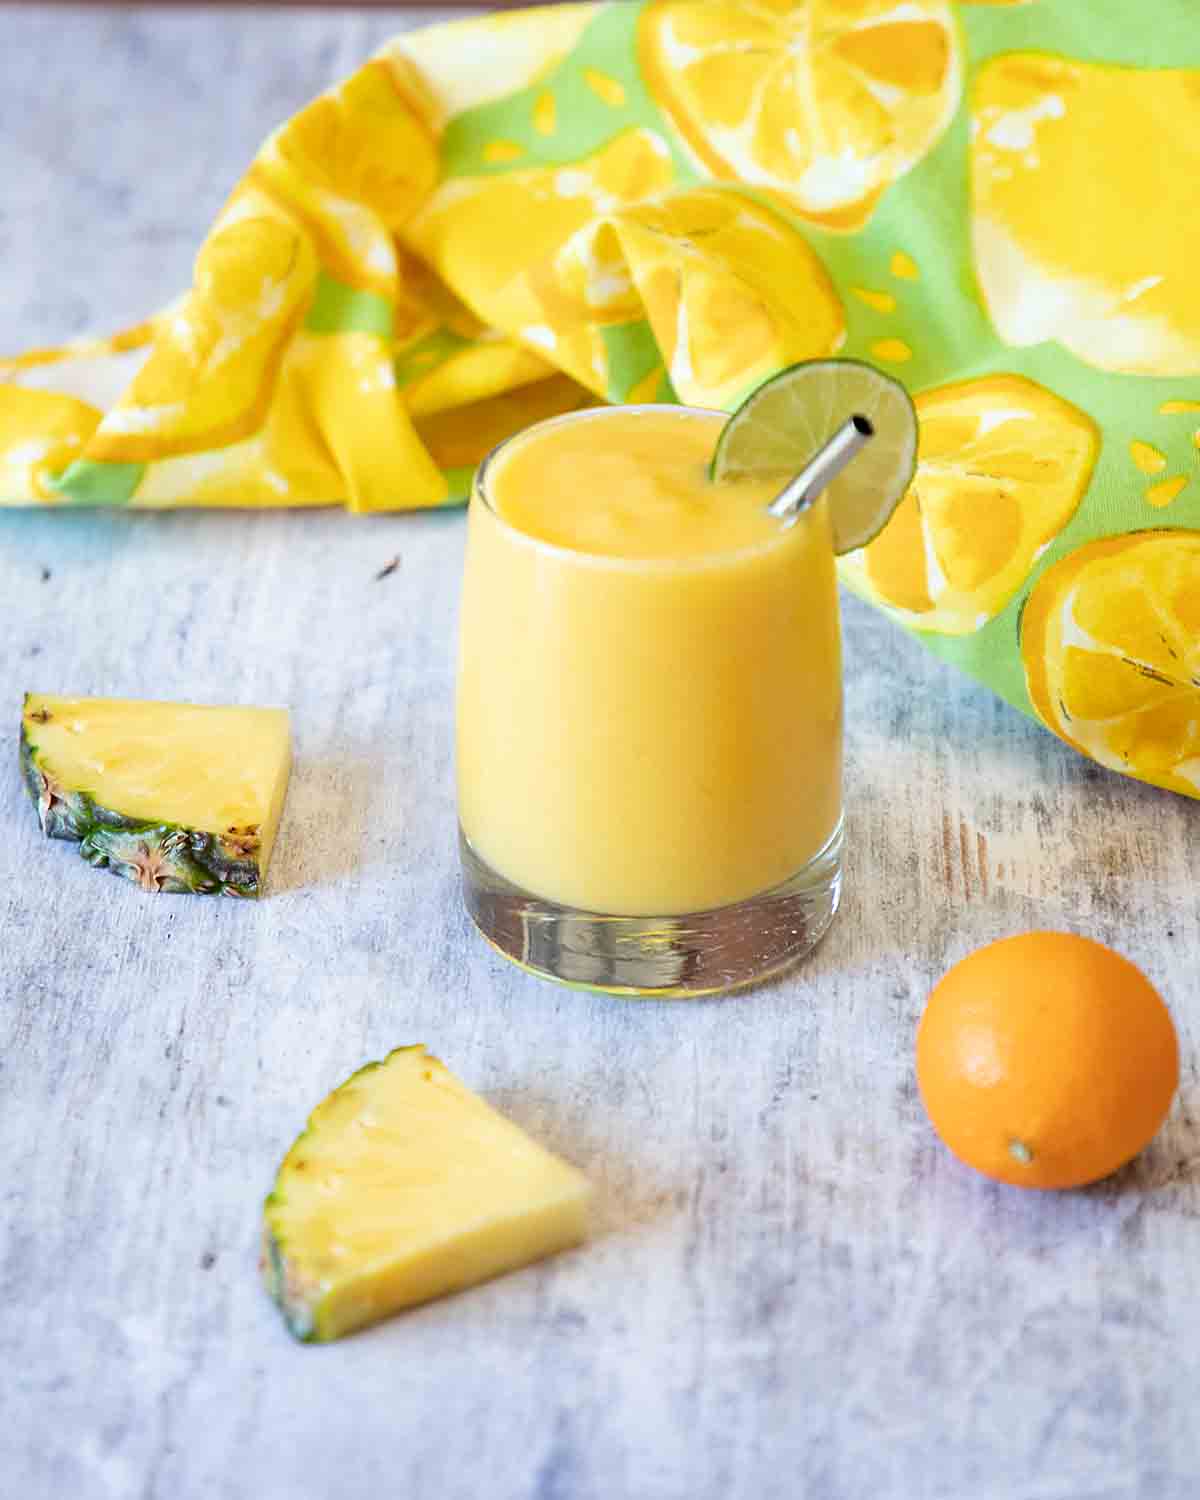 Mango pineapple smoothie in a glass surrounded by fruit.